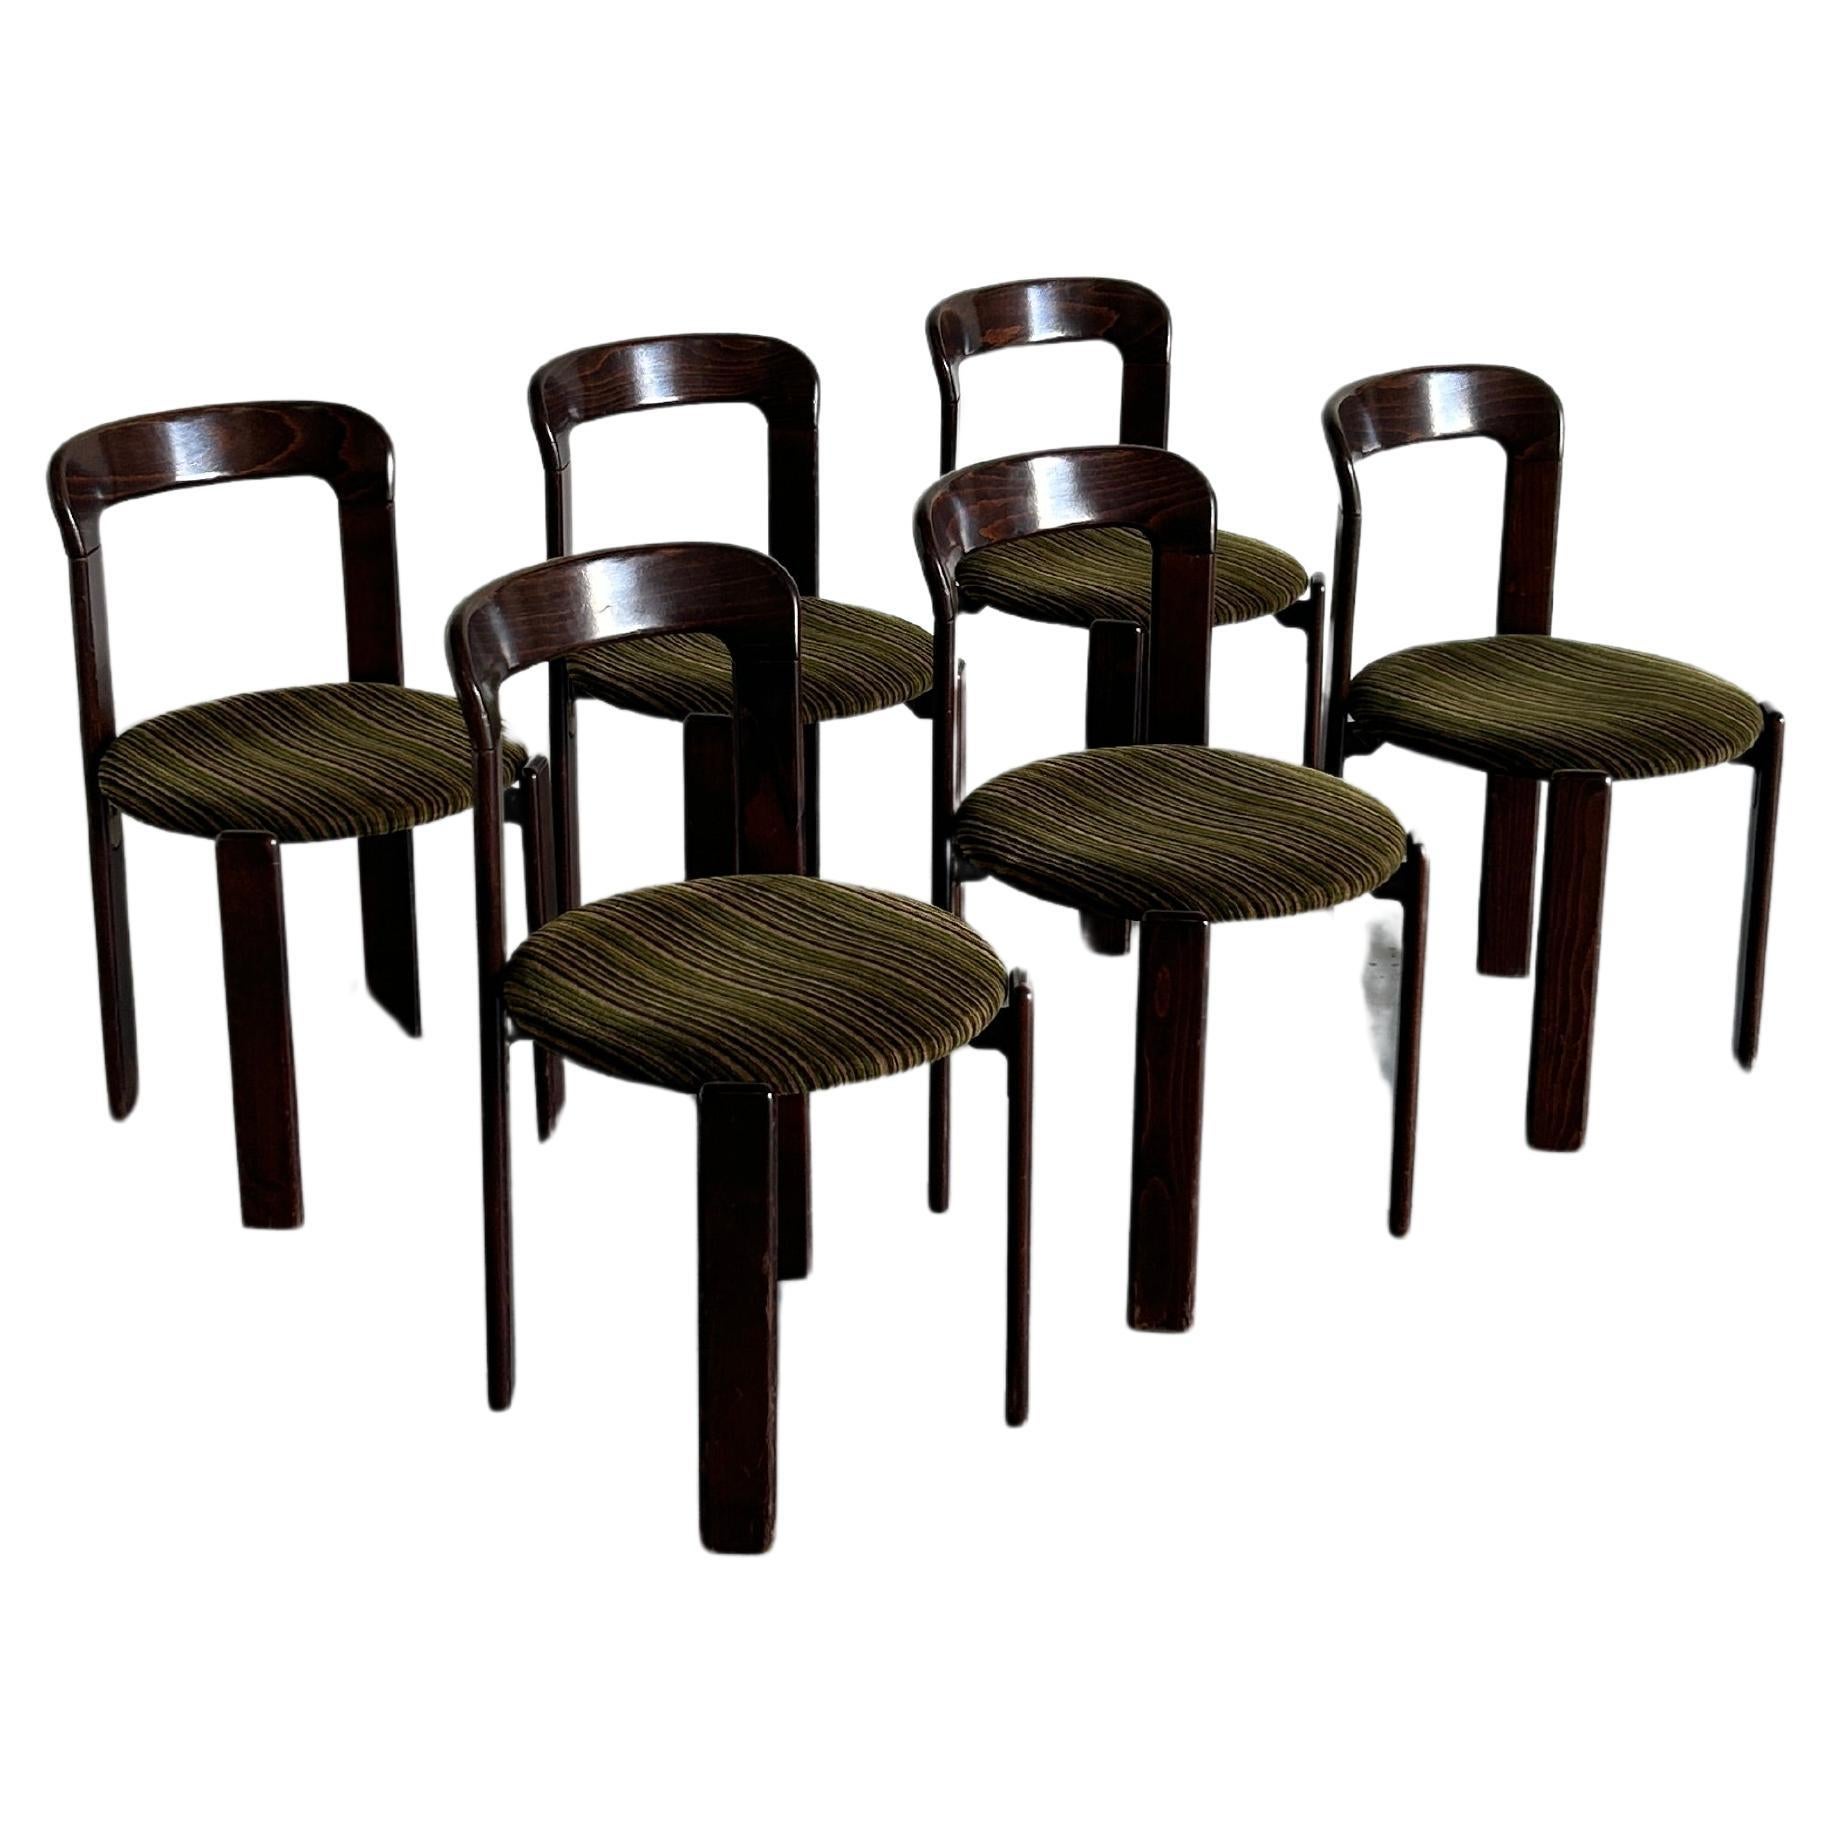 1 of 6 Bruno Rey Stackable Mid-Century Modern Dining Chairs for Kusch & Co, 80s